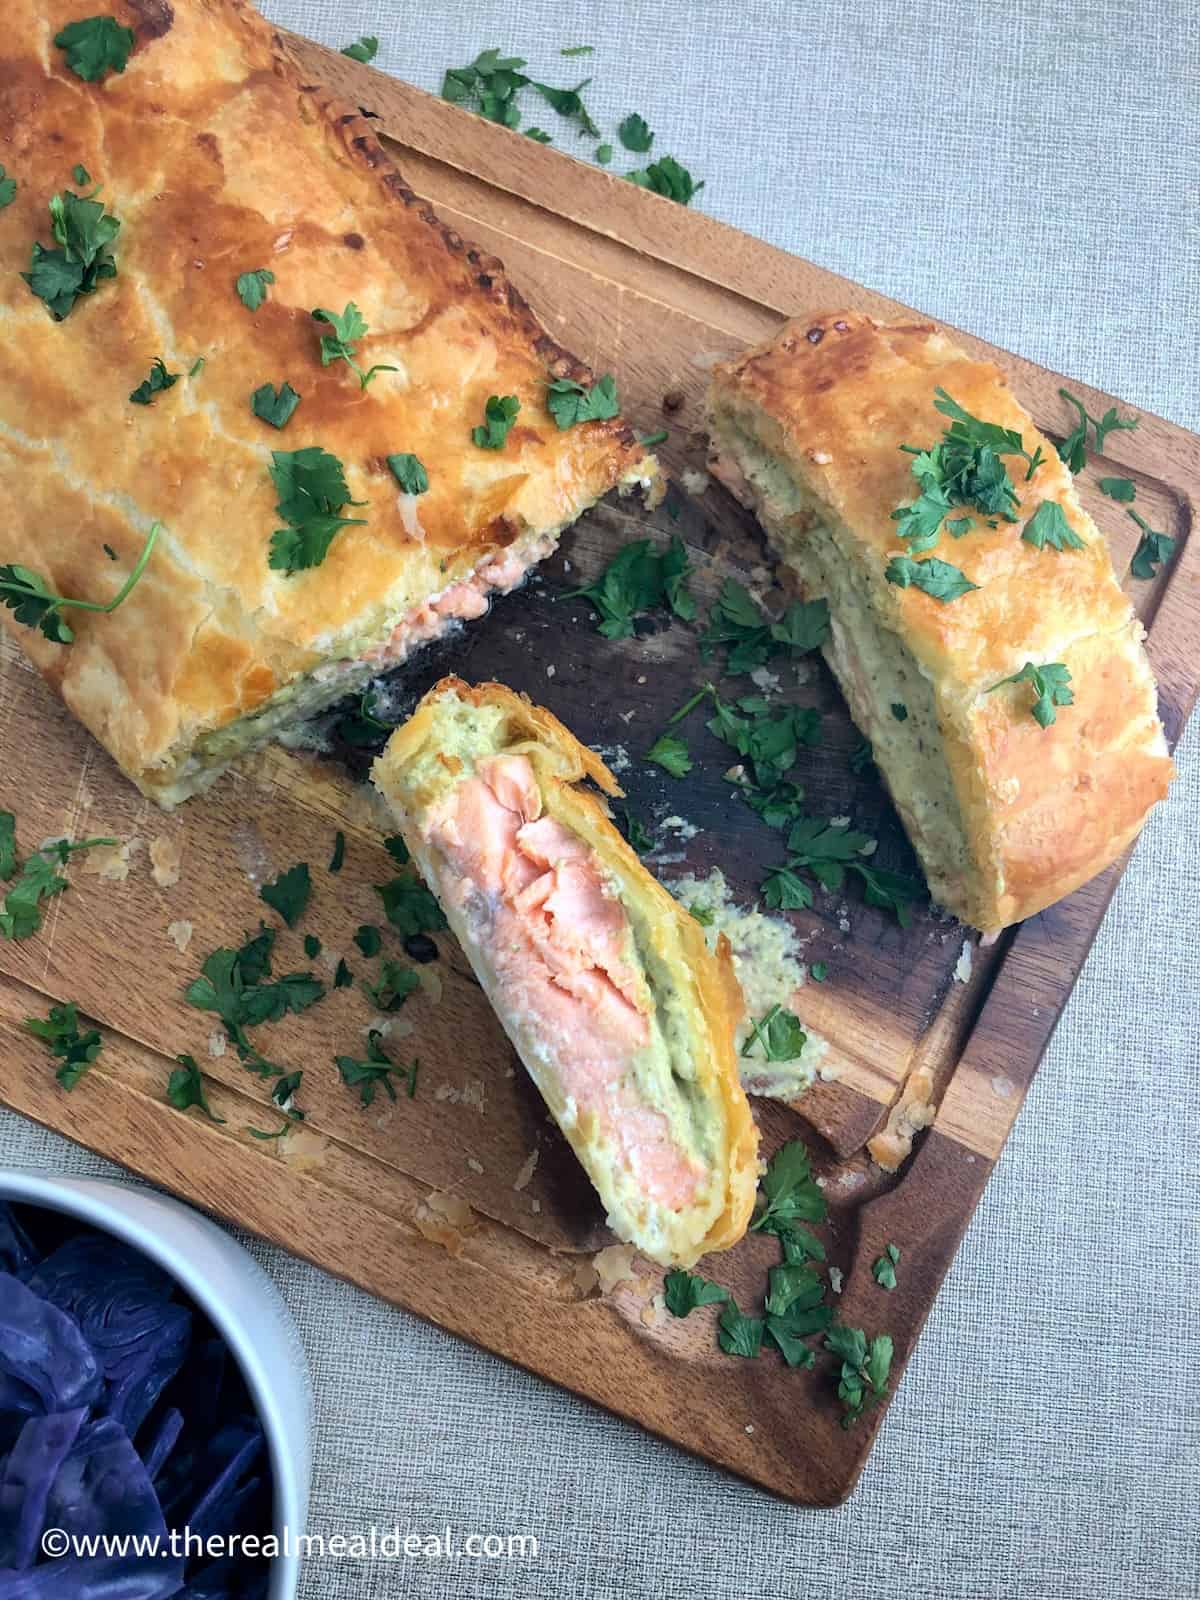 sliced salmon en croute on wooden board showing inside with cooked salmon and cream cheese and spinach